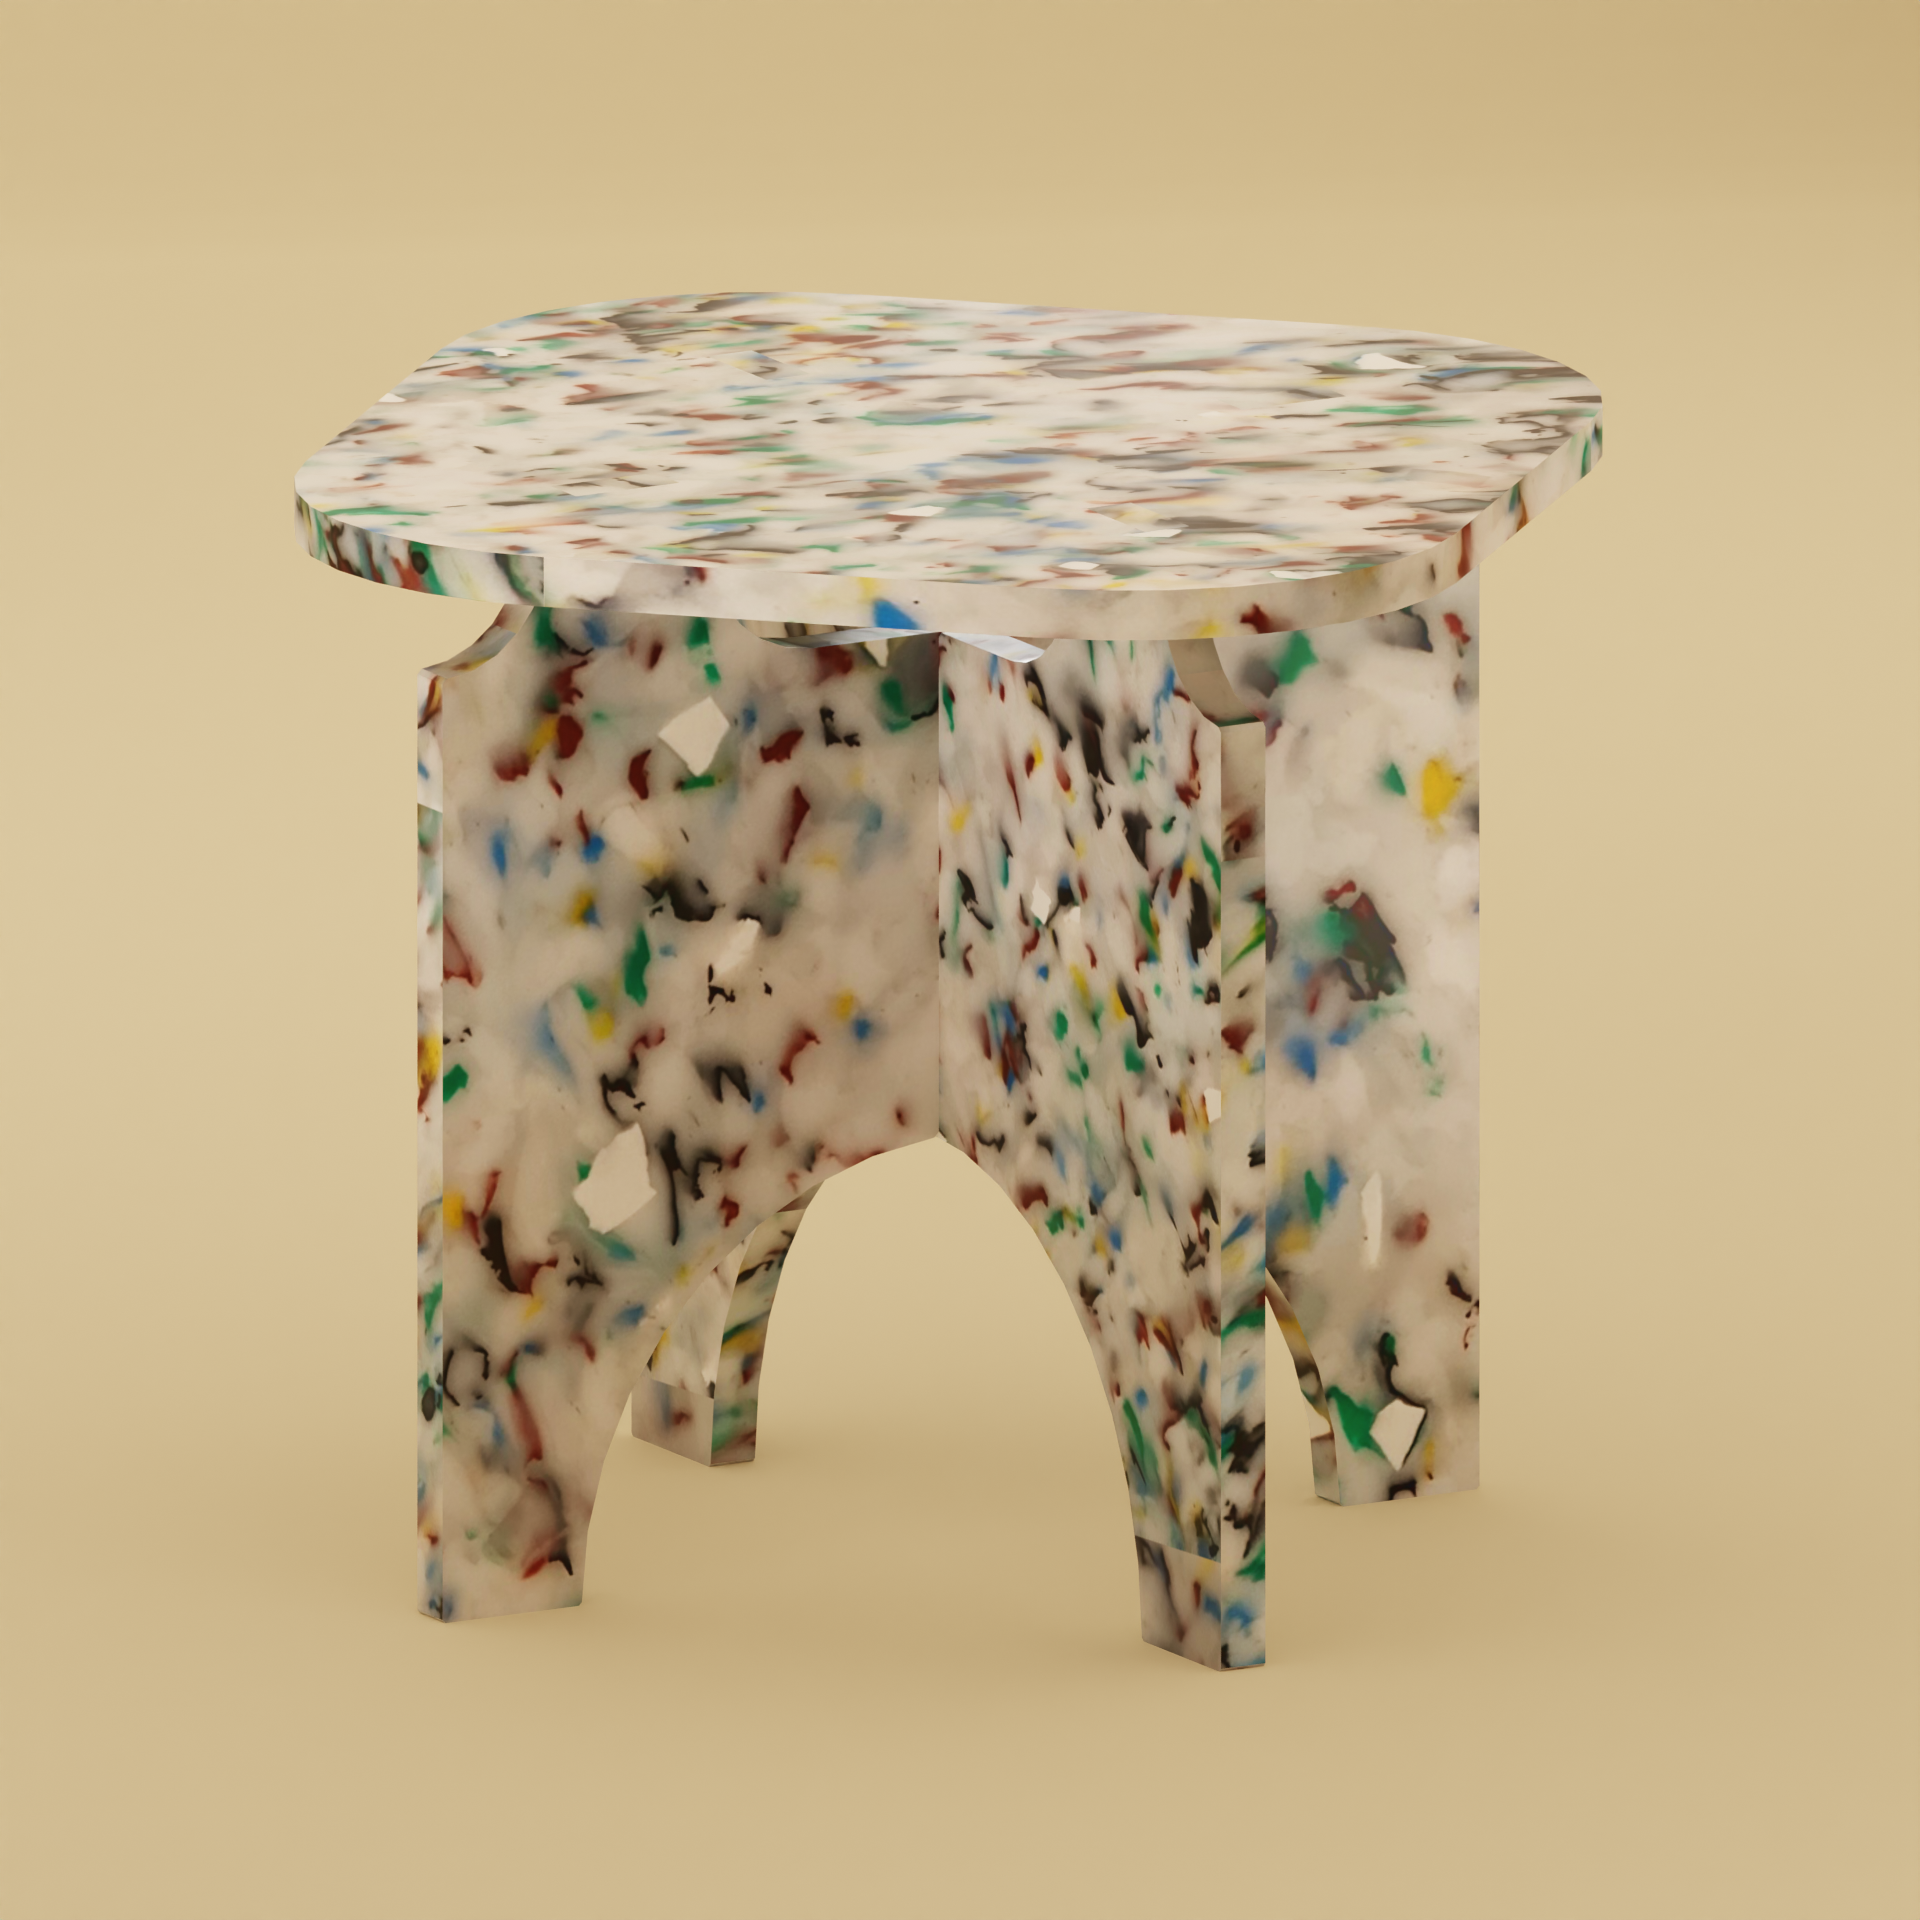 SQUARE TOP STOOL BY THE MINIMONO PROJECT - BRAND FOR ECO FRIENDLY - PLAYFUL - MULTI FUNCTIONAL - SUSTAINABLE - HIGH QUALITY - DESIGN FURNITURE FROM RECYCLED PLASTIC FOR BOTH ADULT AND CHILDREN MADE IN BERLIN GERMANY